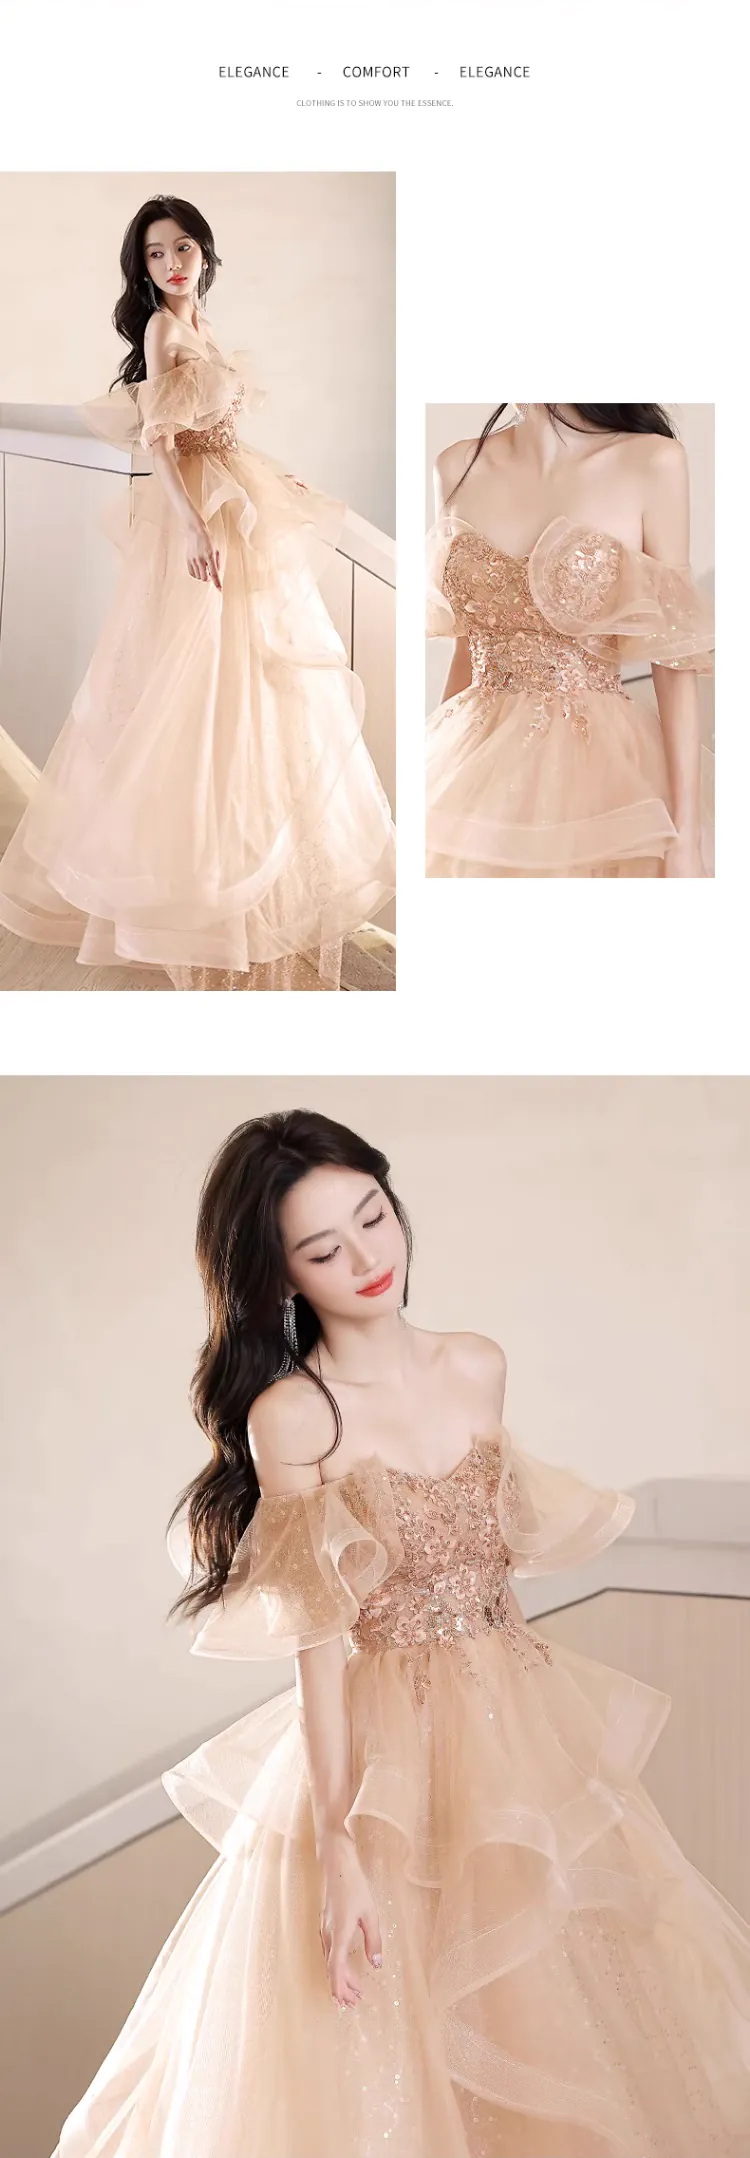 Ladies-Fairy-Champagne-Tulle-Off-the-Shoulder-Prom-Dress-Evening-Gown12